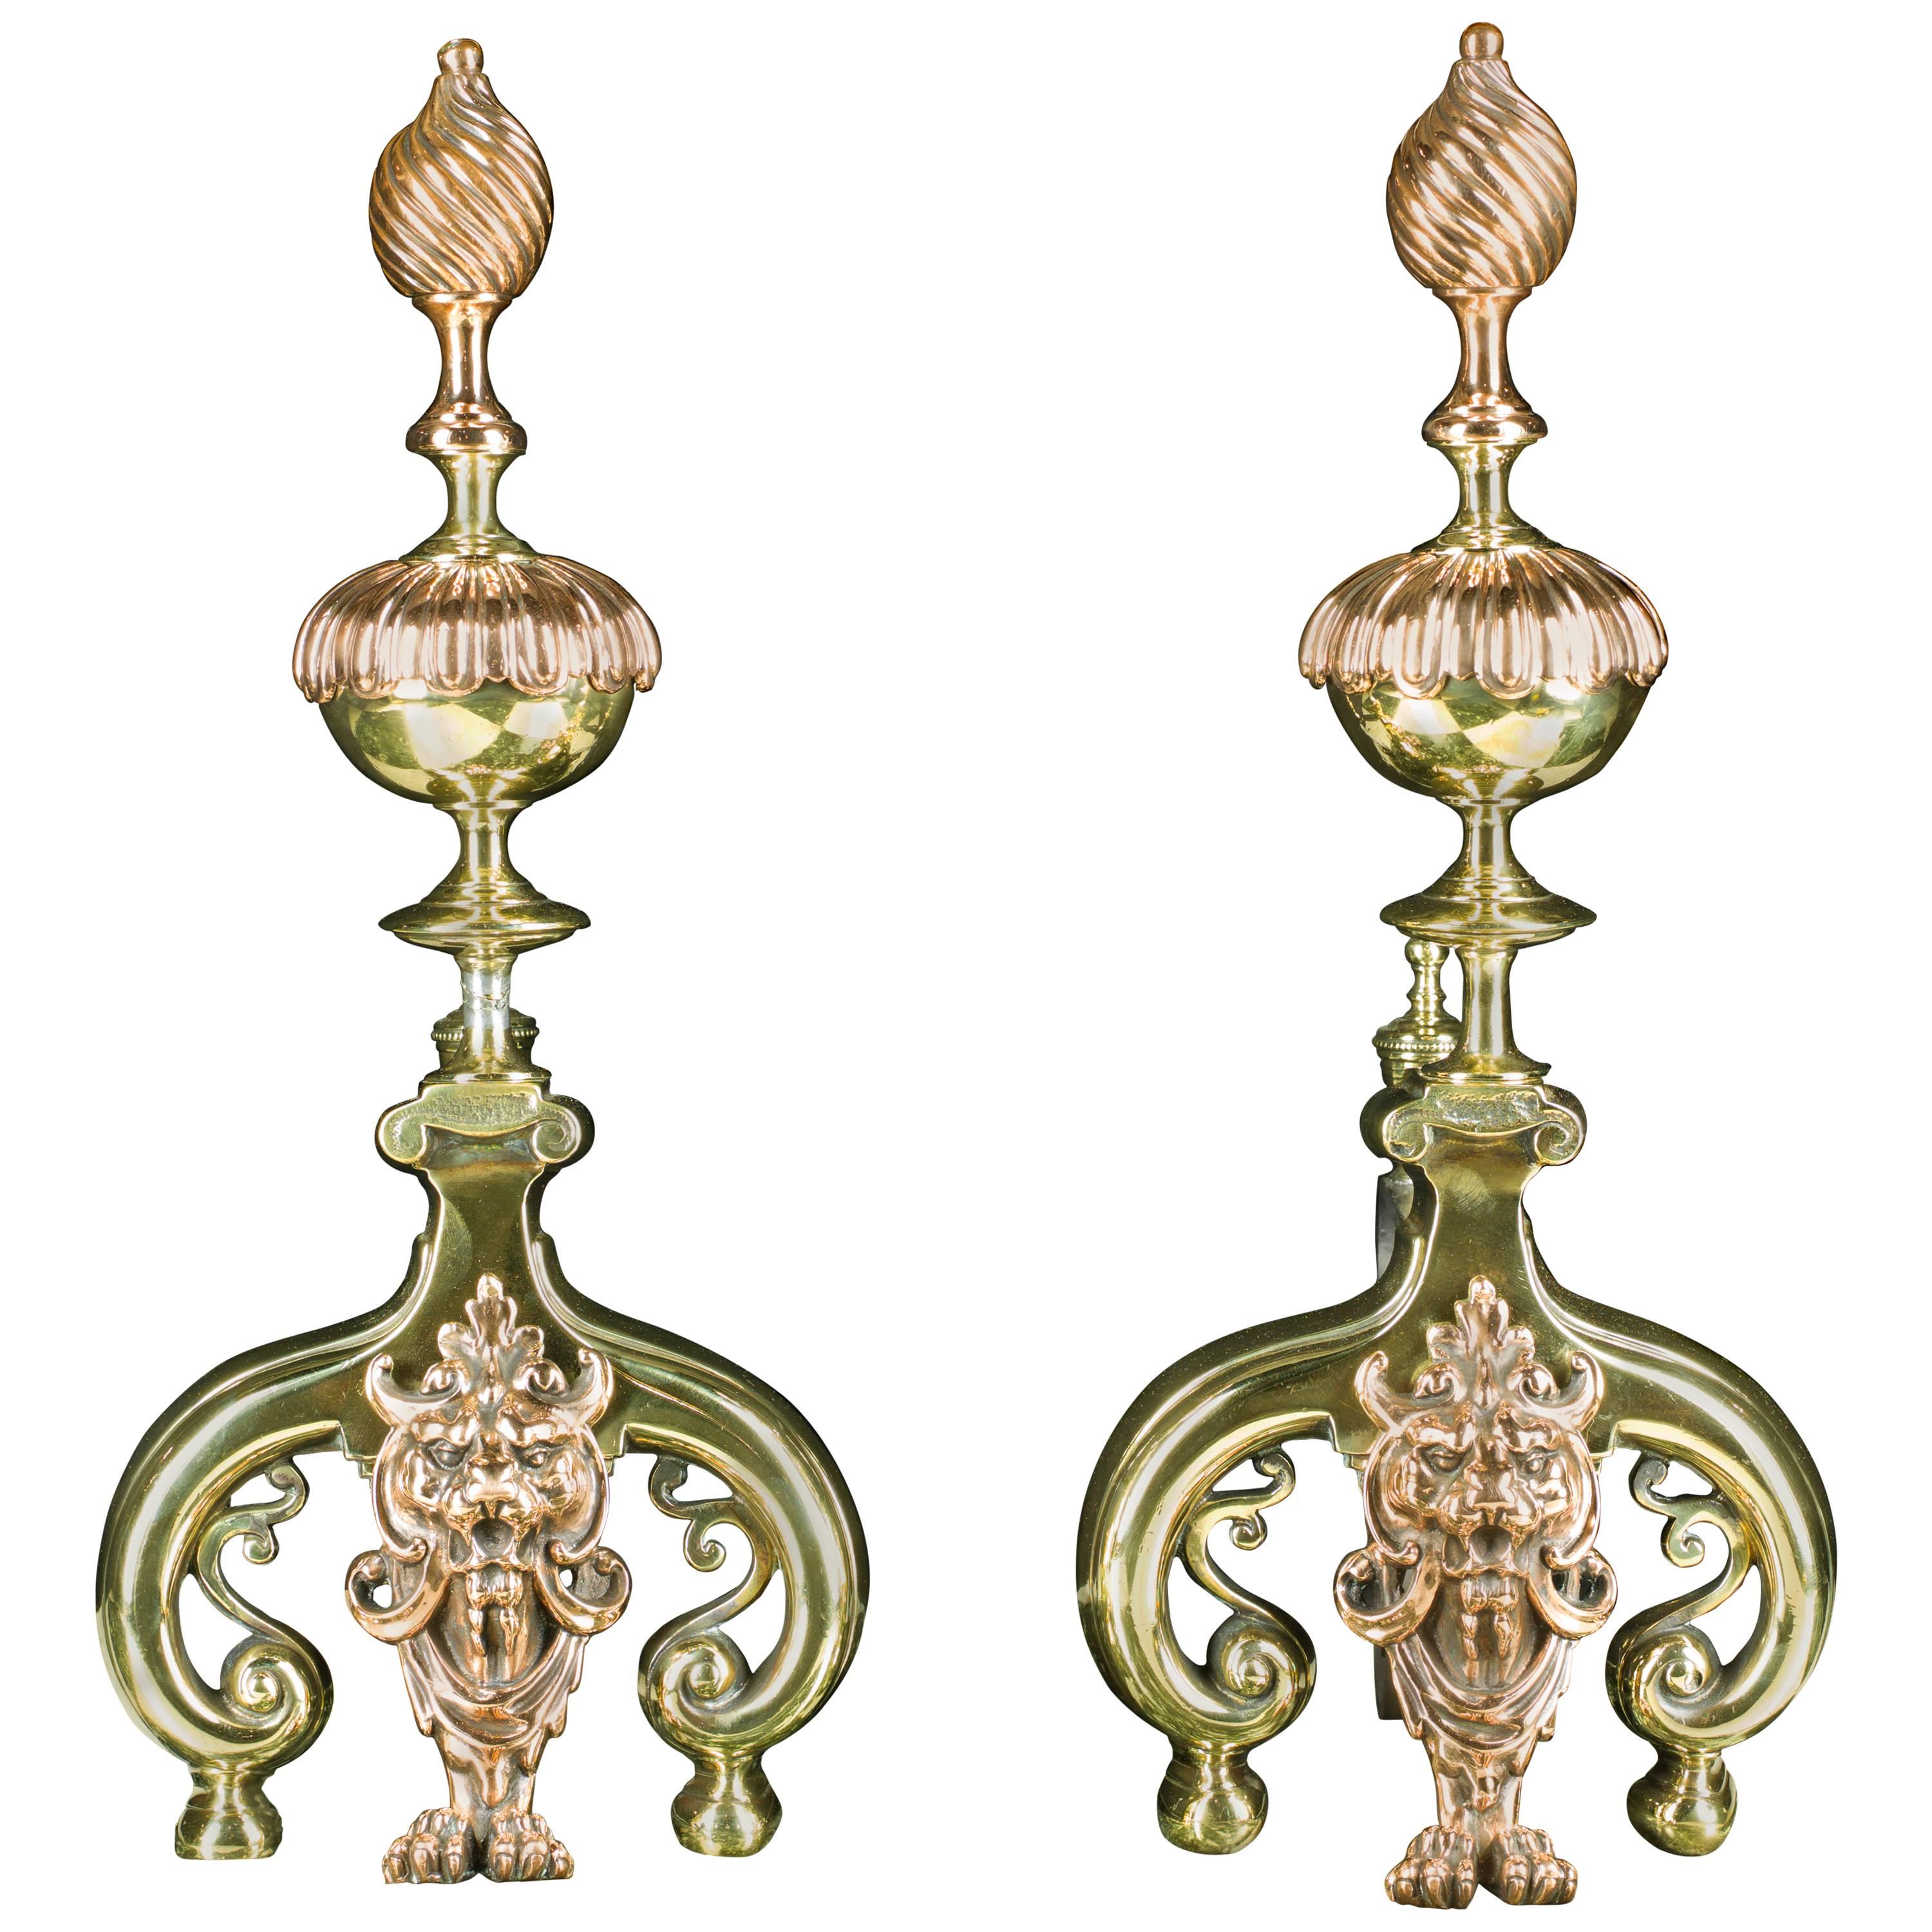 Pair of Antique Louis XIV Style Copper and Brass Andirons